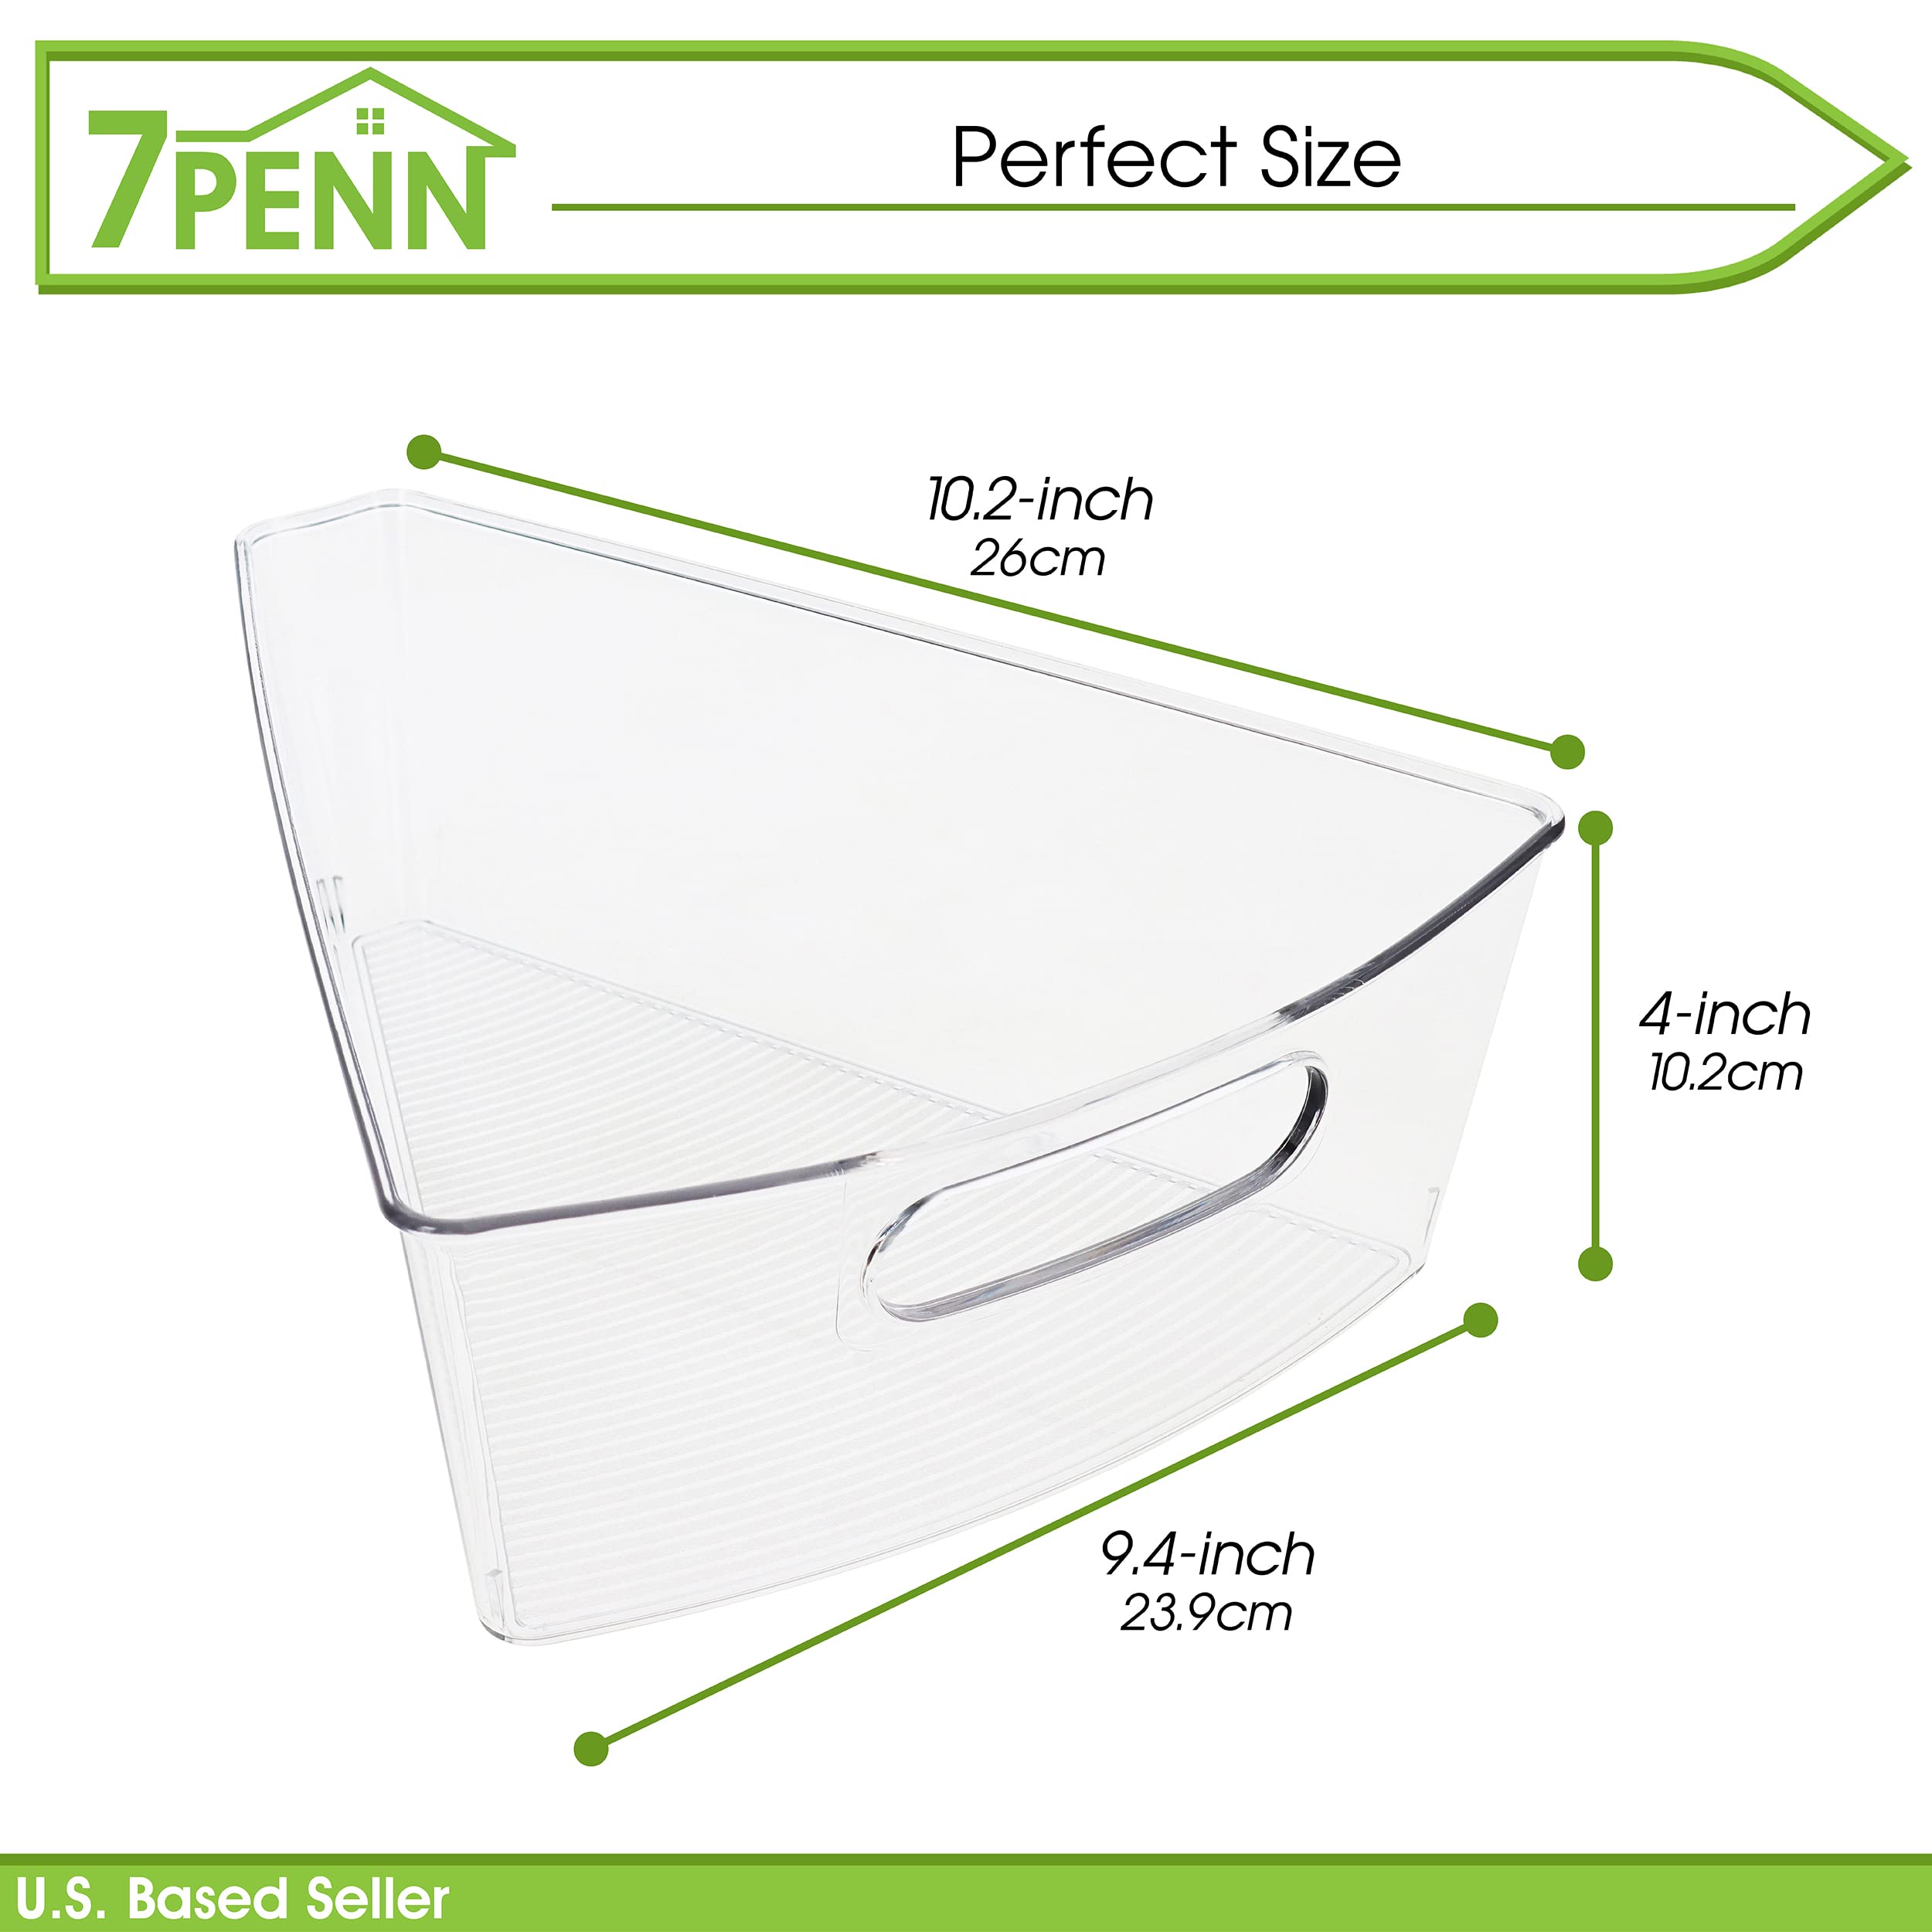 7Penn Corner Cabinet Lazy Susan Organizer Wedges 4 Pack - Deep Lazy Susan Organizer Bins for 26in Pantry Turntable - Clear Spice Storage Containers for Cupboard, Refrigerator, Kitchen, Bathroom